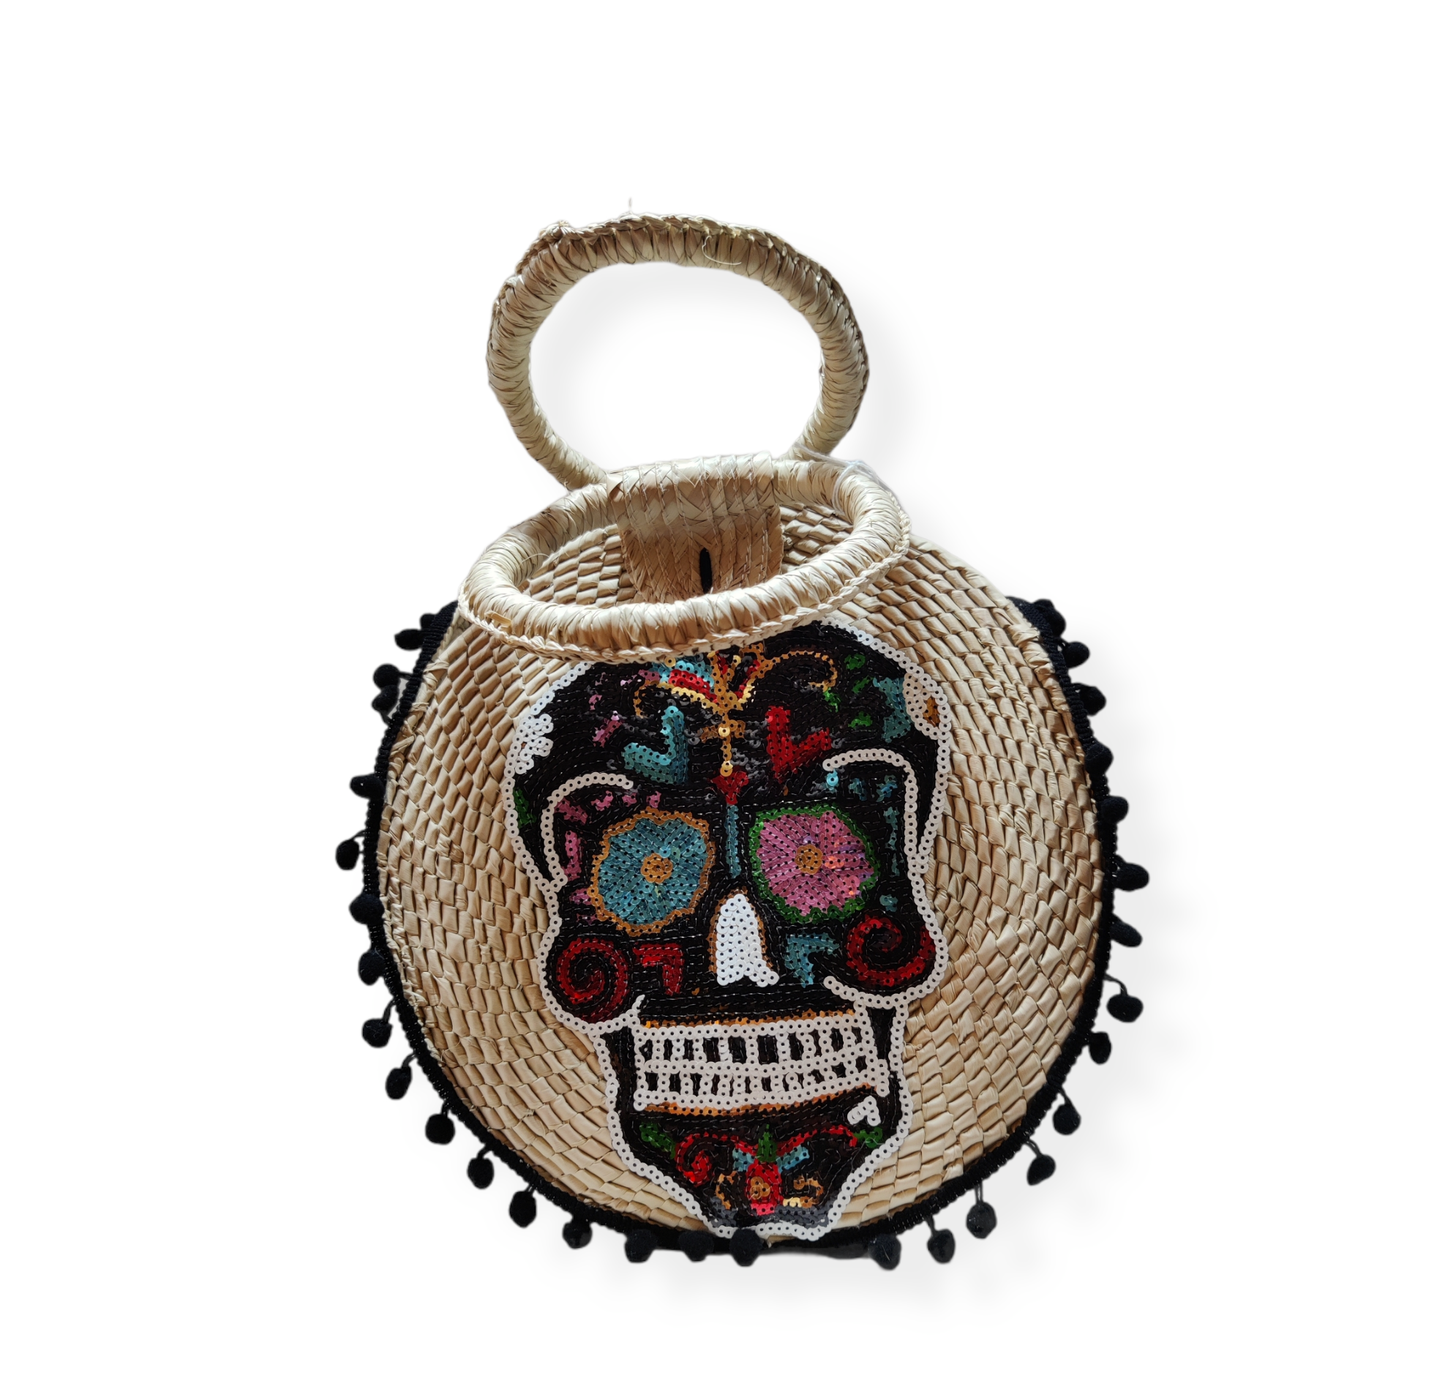 BAG WITH SKULL